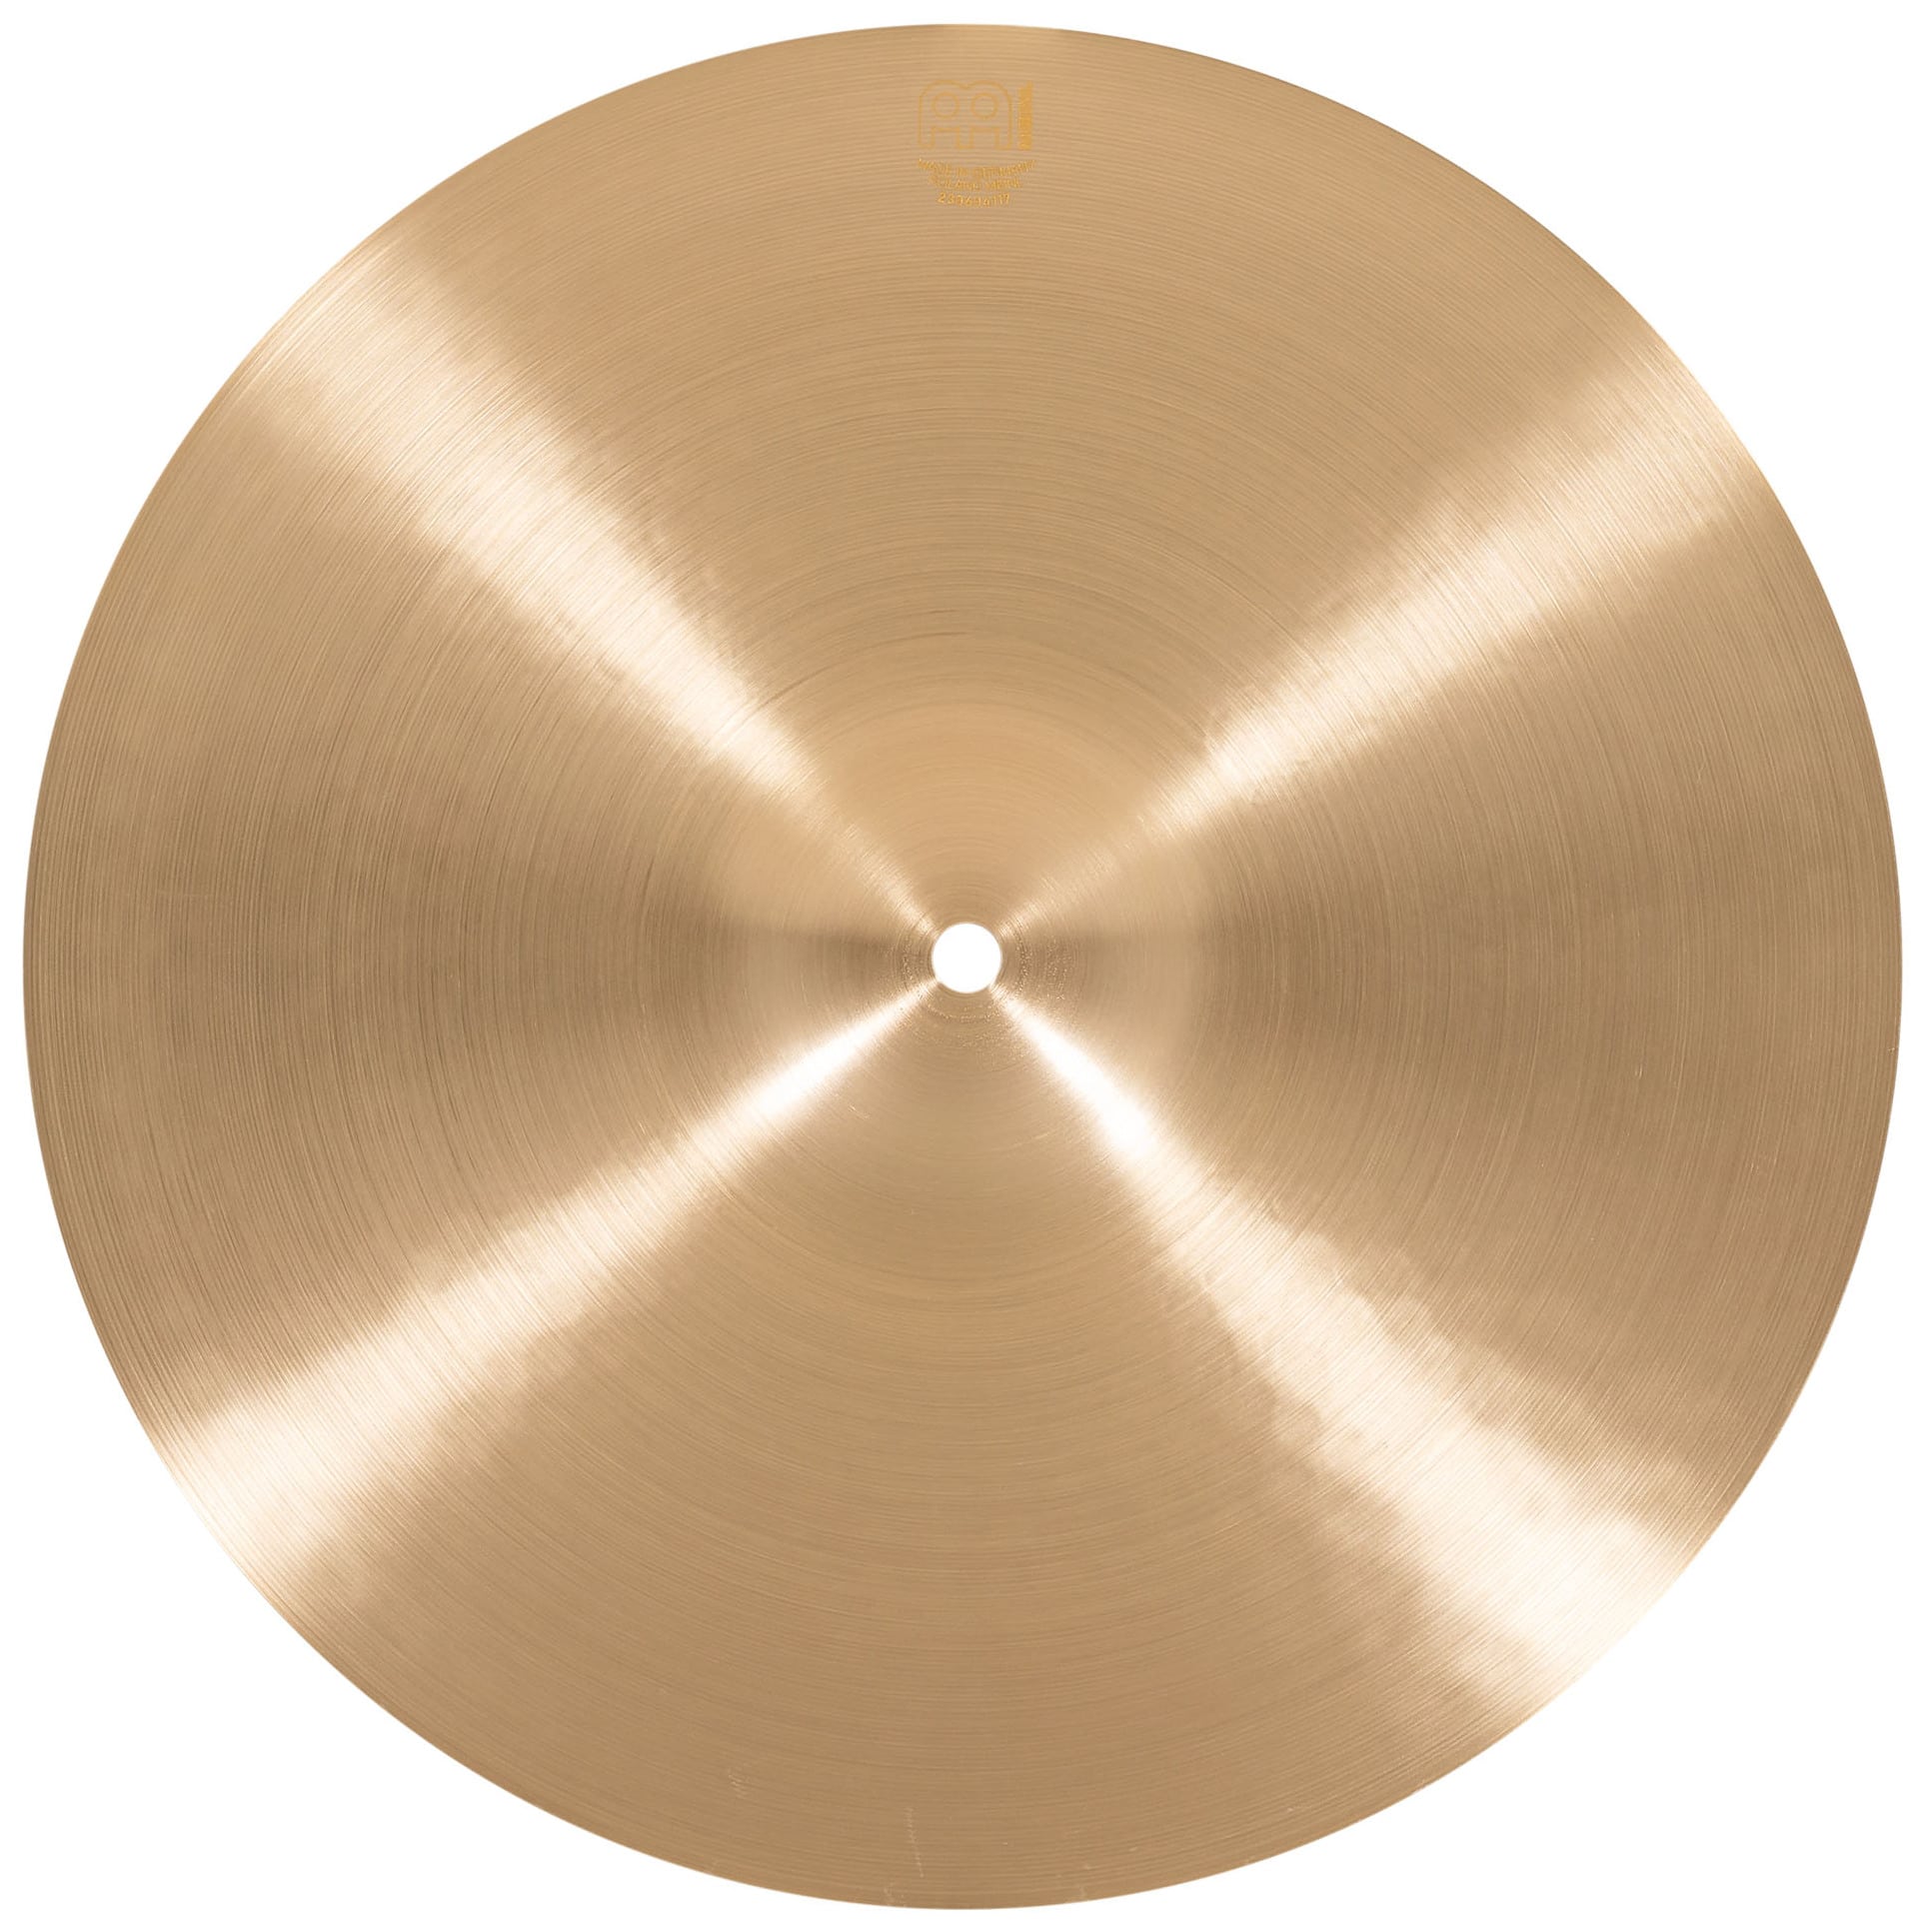 Meinl Cymbals PA14SWH - 14" Pure Alloy Soundwave Hihat 9